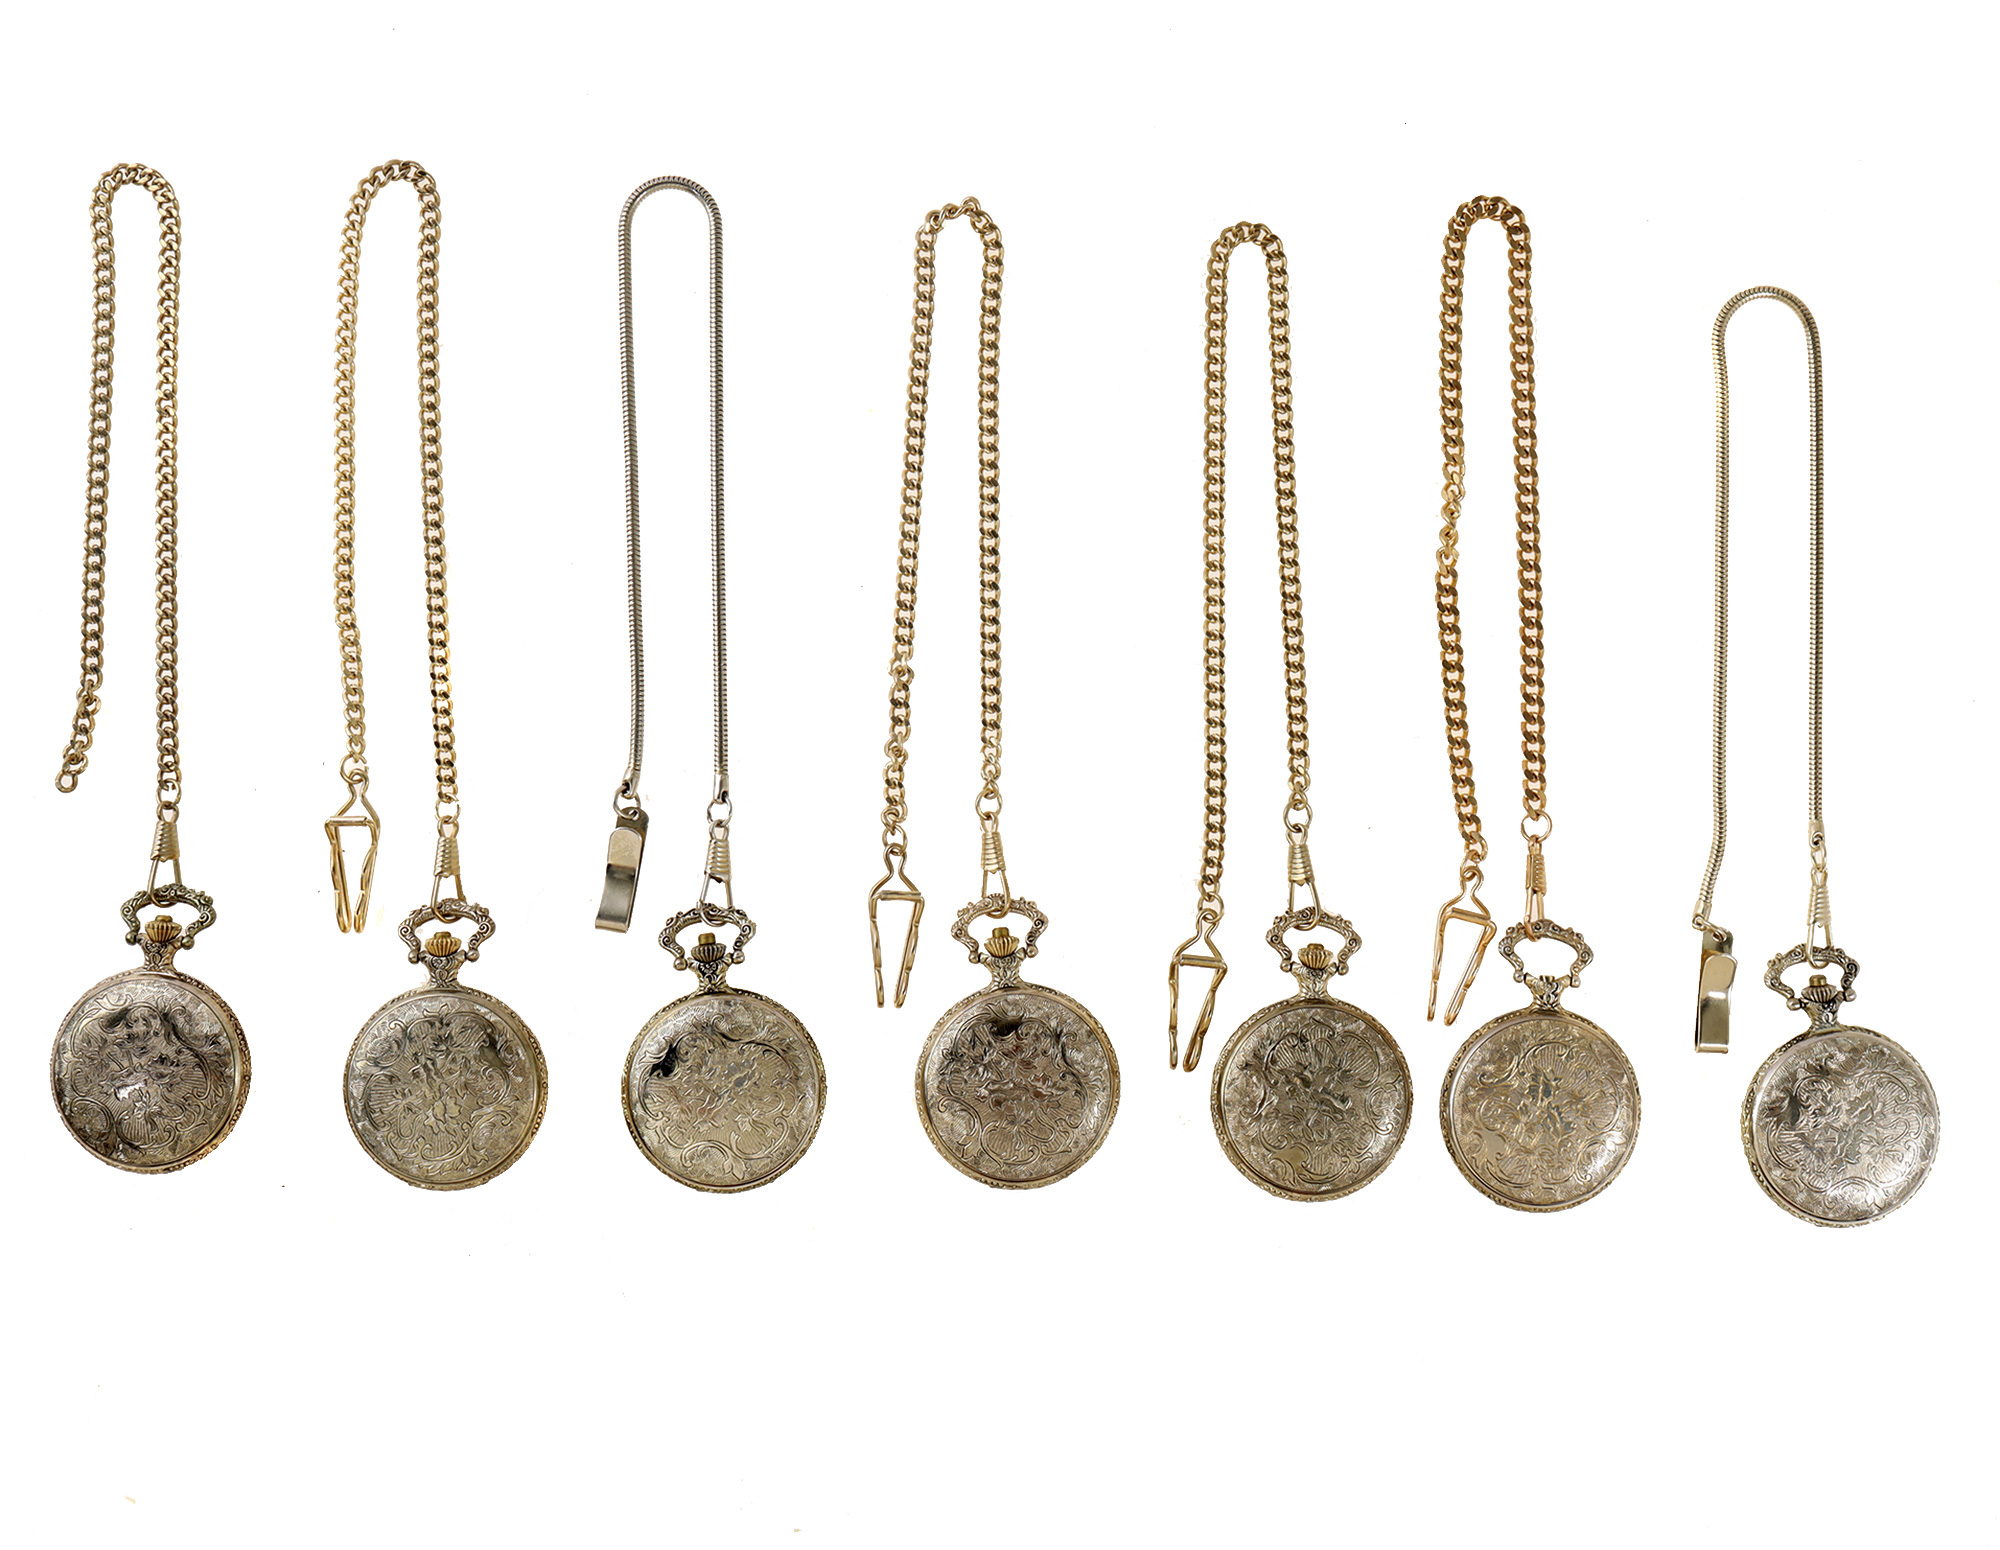 SET OF SEVEN REMINGTON POCKET WATCHES WITH CHAINS PIC-0